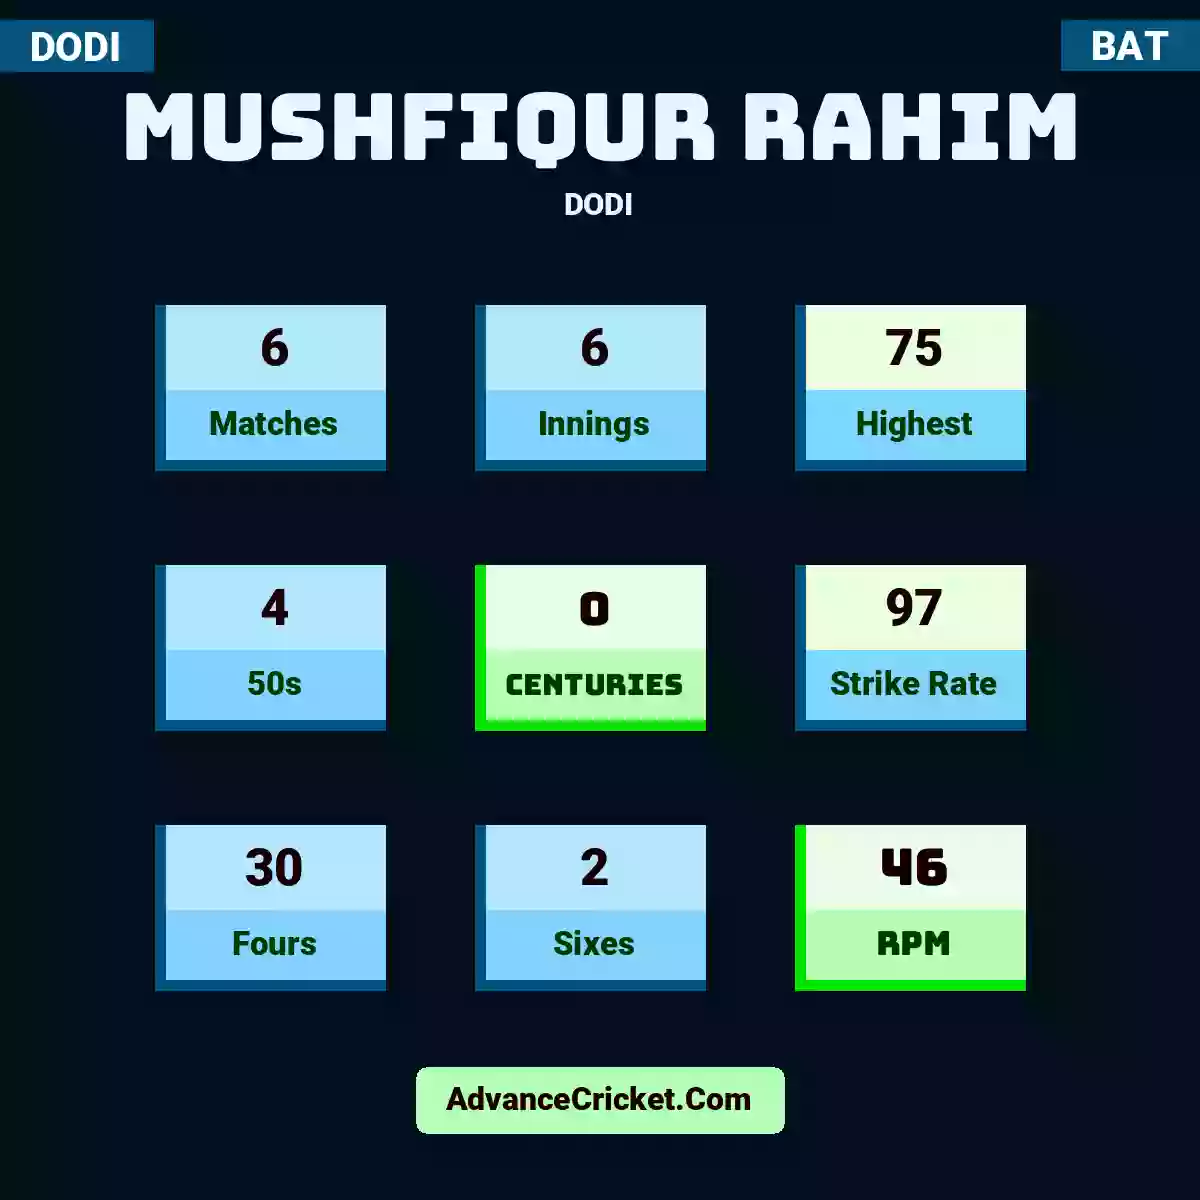 Mushfiqur Rahim DODI , Mushfiqur Rahim played 6 matches, scored 75 runs as highest, 4 half-centuries, and 0 centuries, with a strike rate of 97. M.Rahim hit 30 fours and 2 sixes, with an RPM of 46.